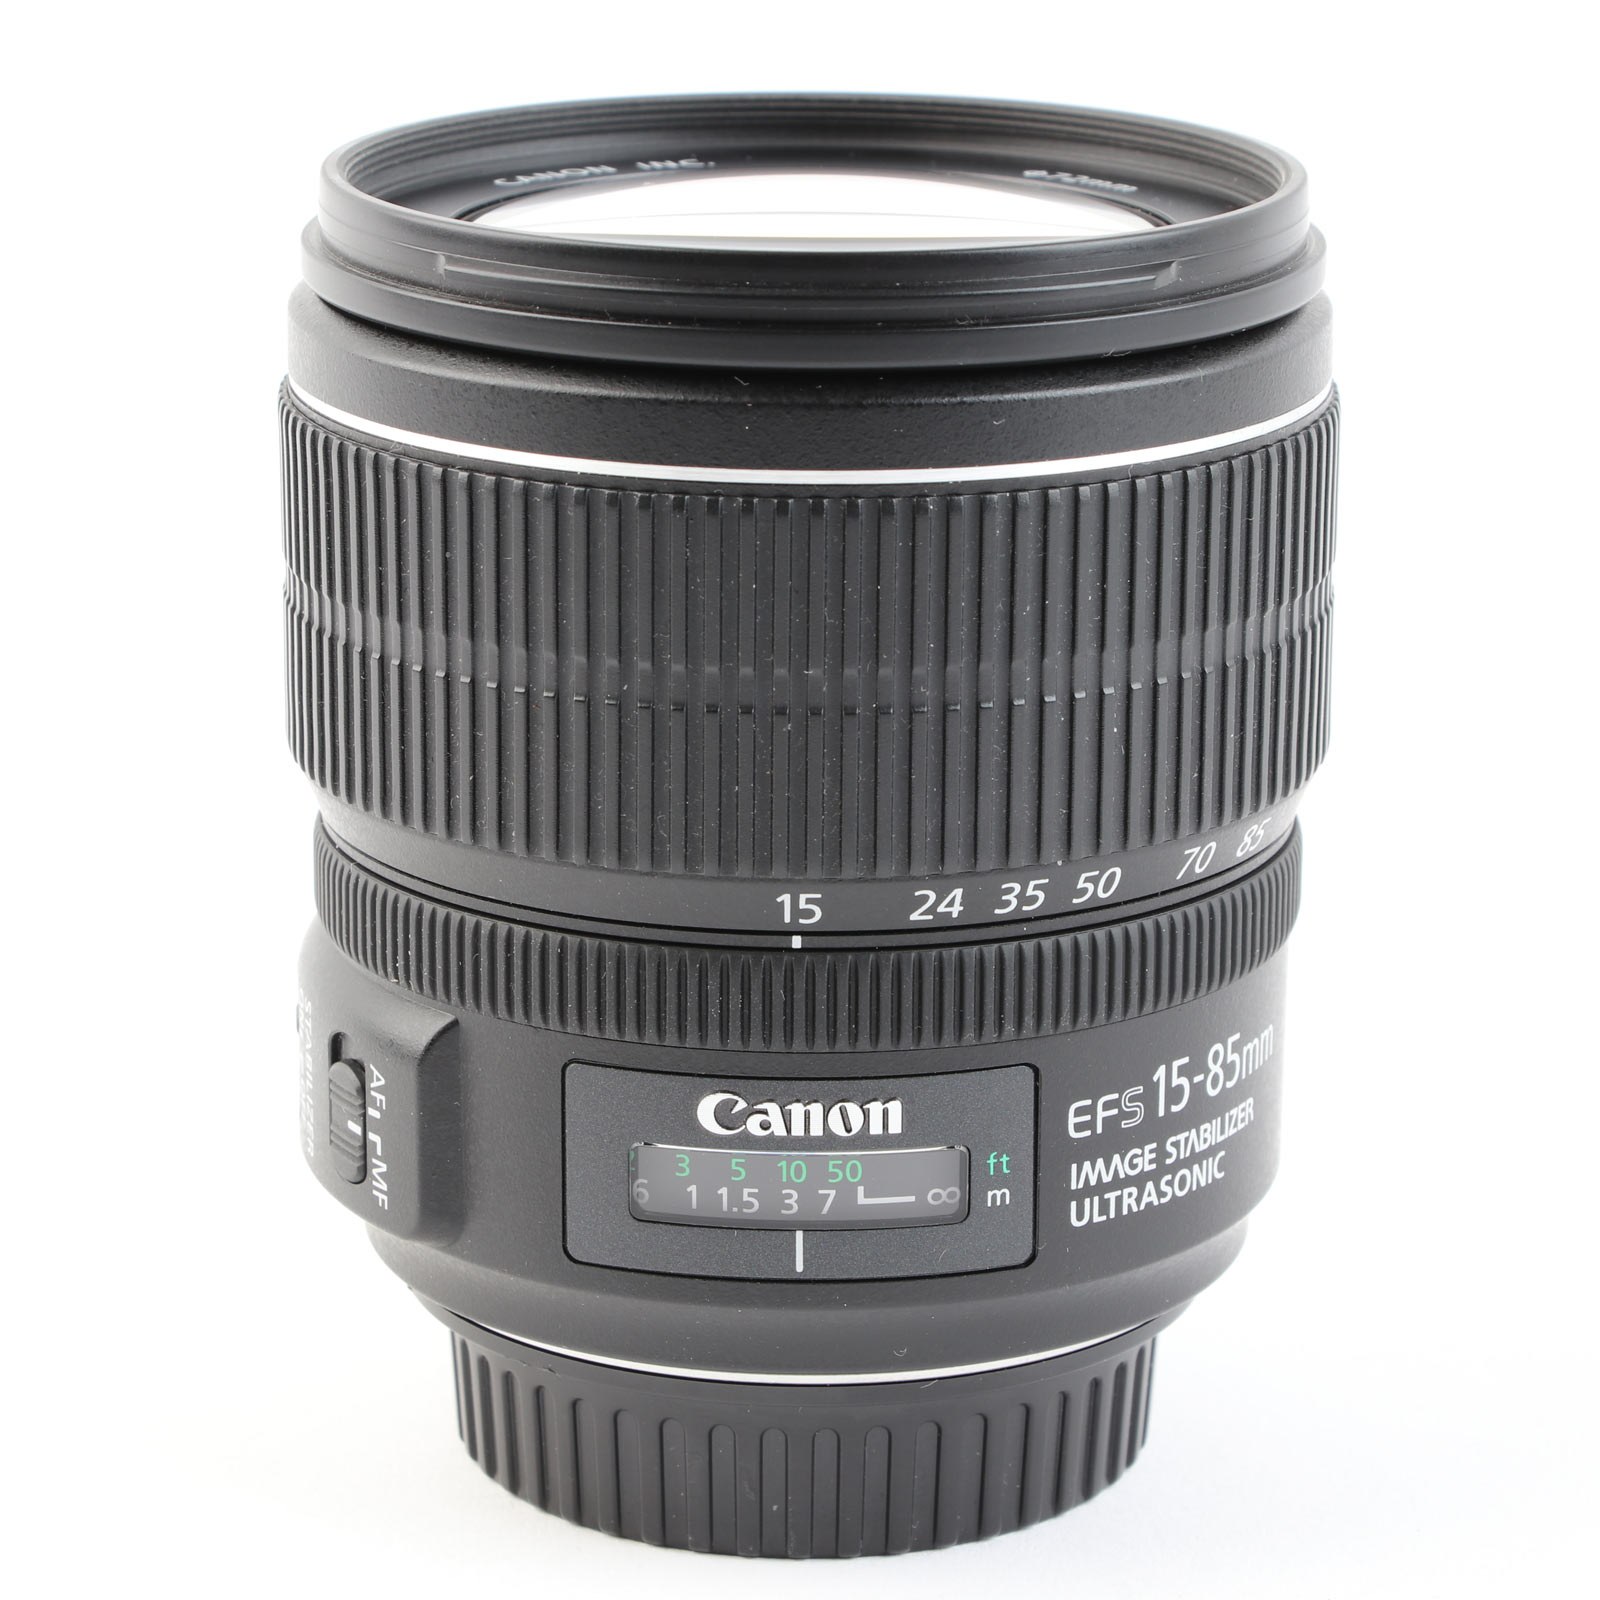 USED Canon EF-S 15-85mm f3.5-5.6 IS USM Lens | Wex Photo Video